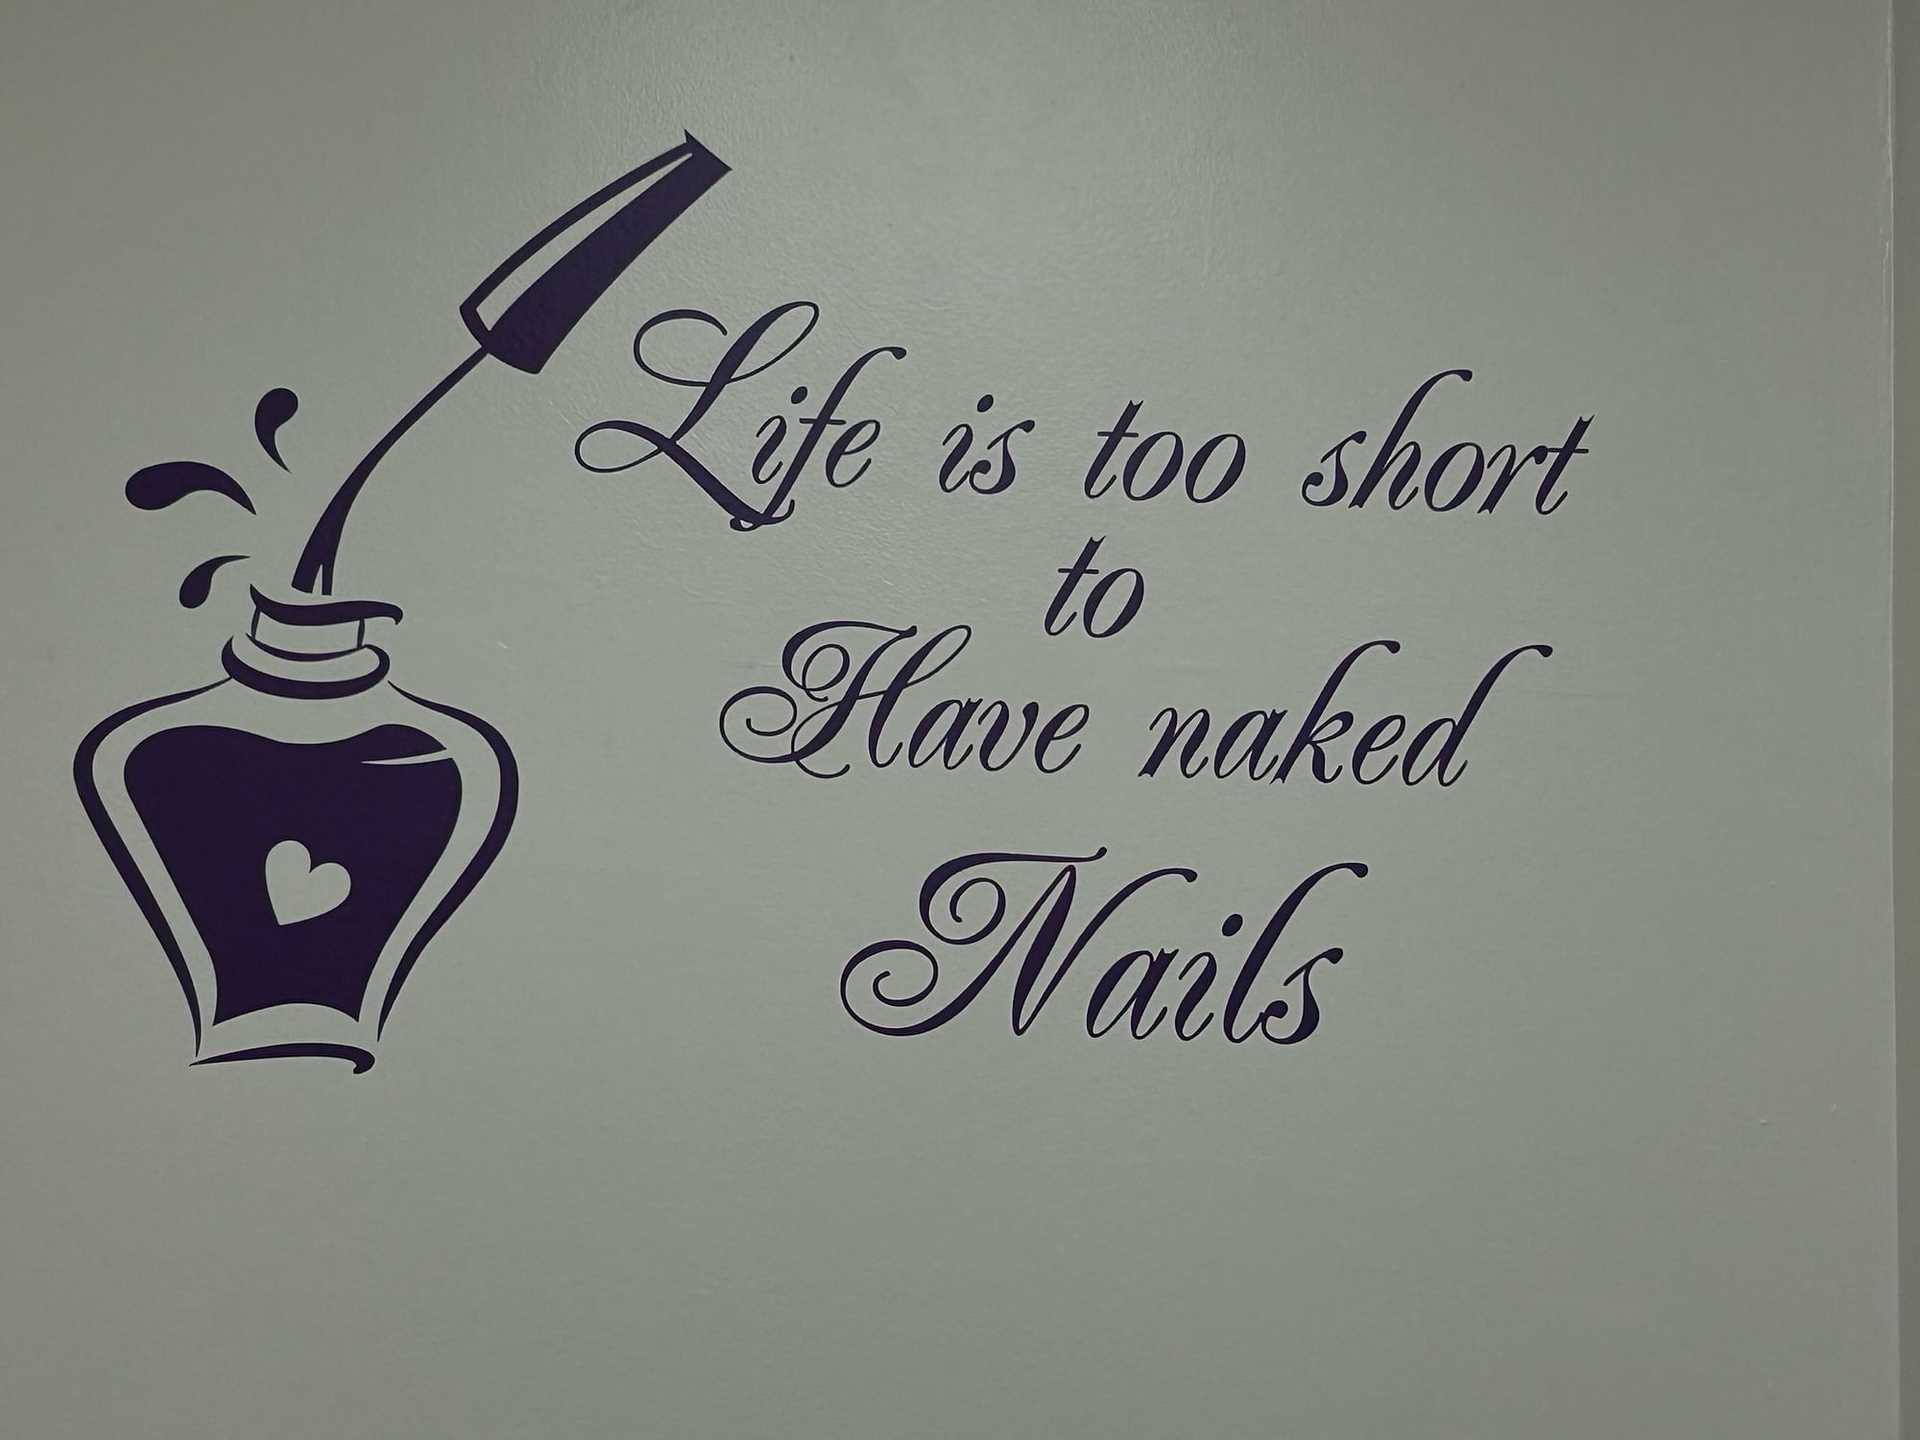 Wall art of an ink bottle with quote "Life is too short to have naked Nails.